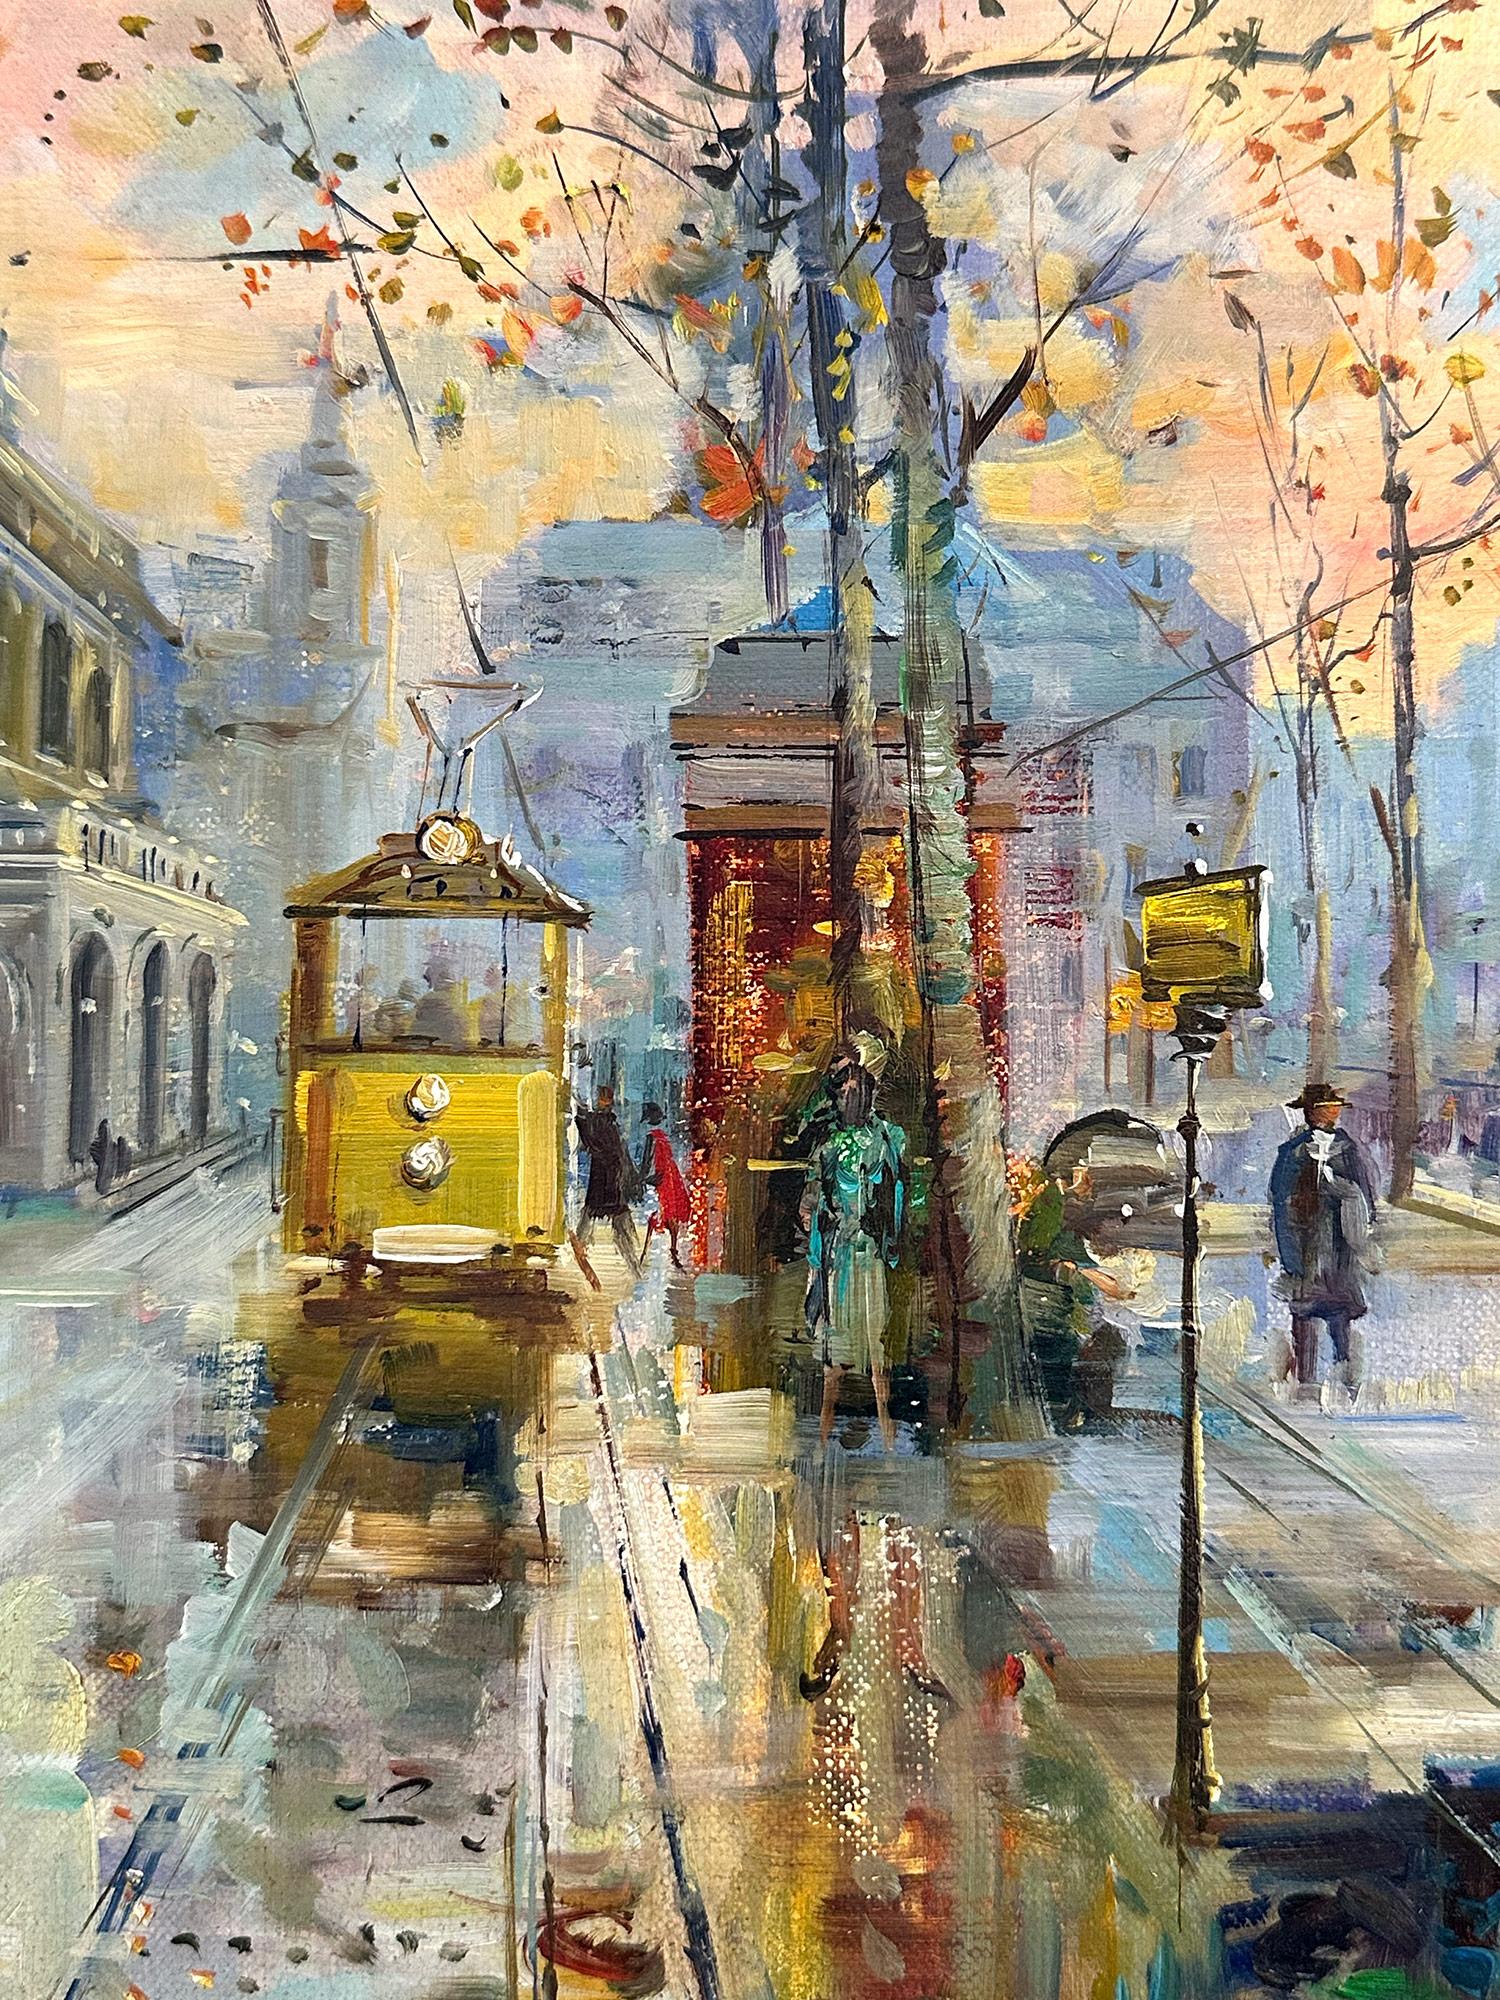 A beautiful oil on canvas painting by Hungarian artist, Hugo Matzenauer. Matzenauer was a painter known for his colorful cityscapes depicting the times of his generation. His work is comparable to those of Jules Herve, Antoine Blanchard, and Edouard